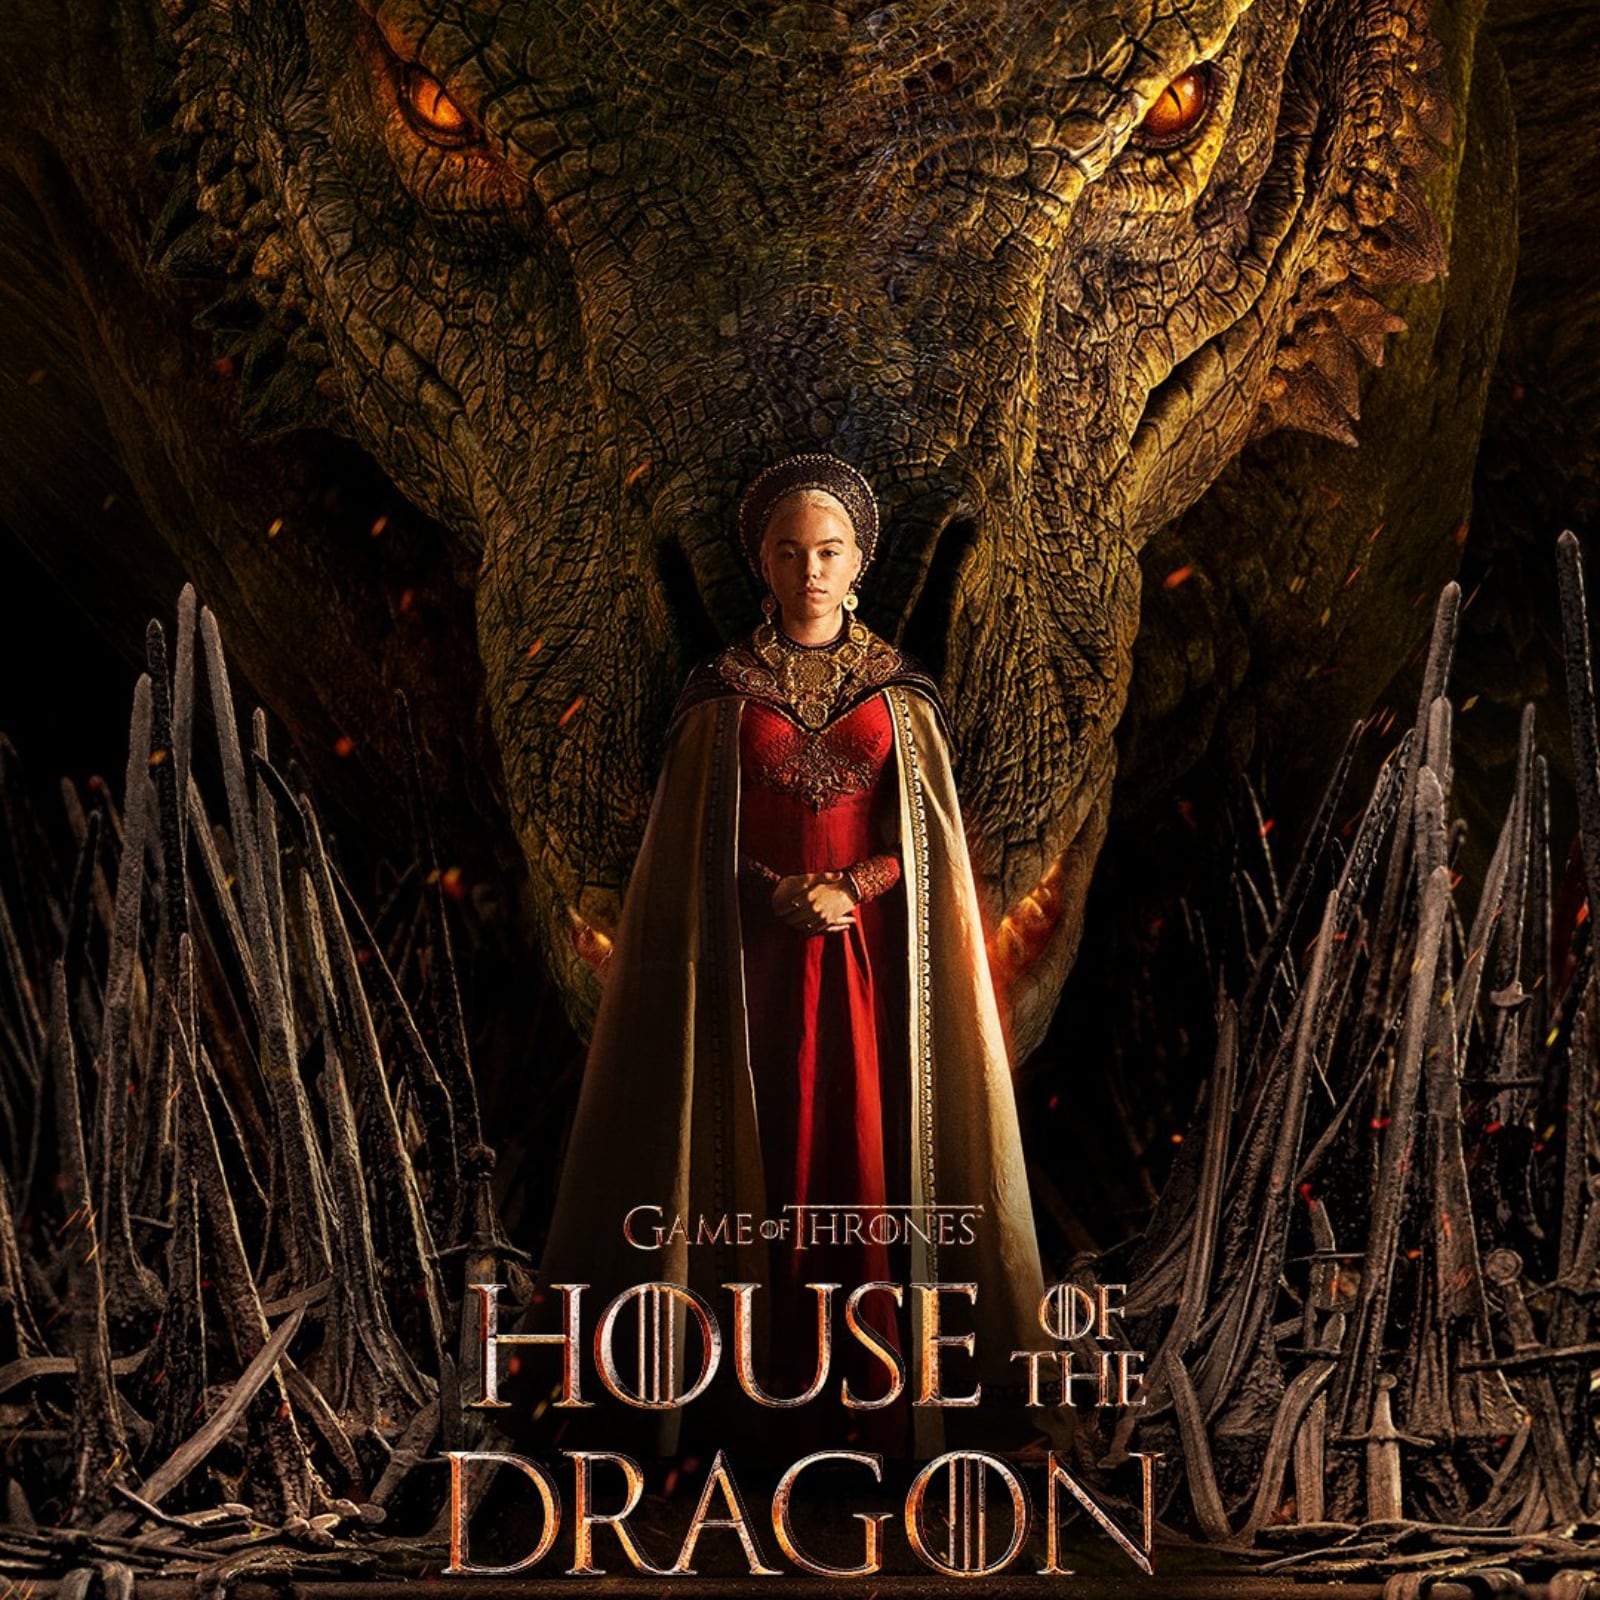 House of the Dragon Episode 1 Review: A well-crafted prequel to